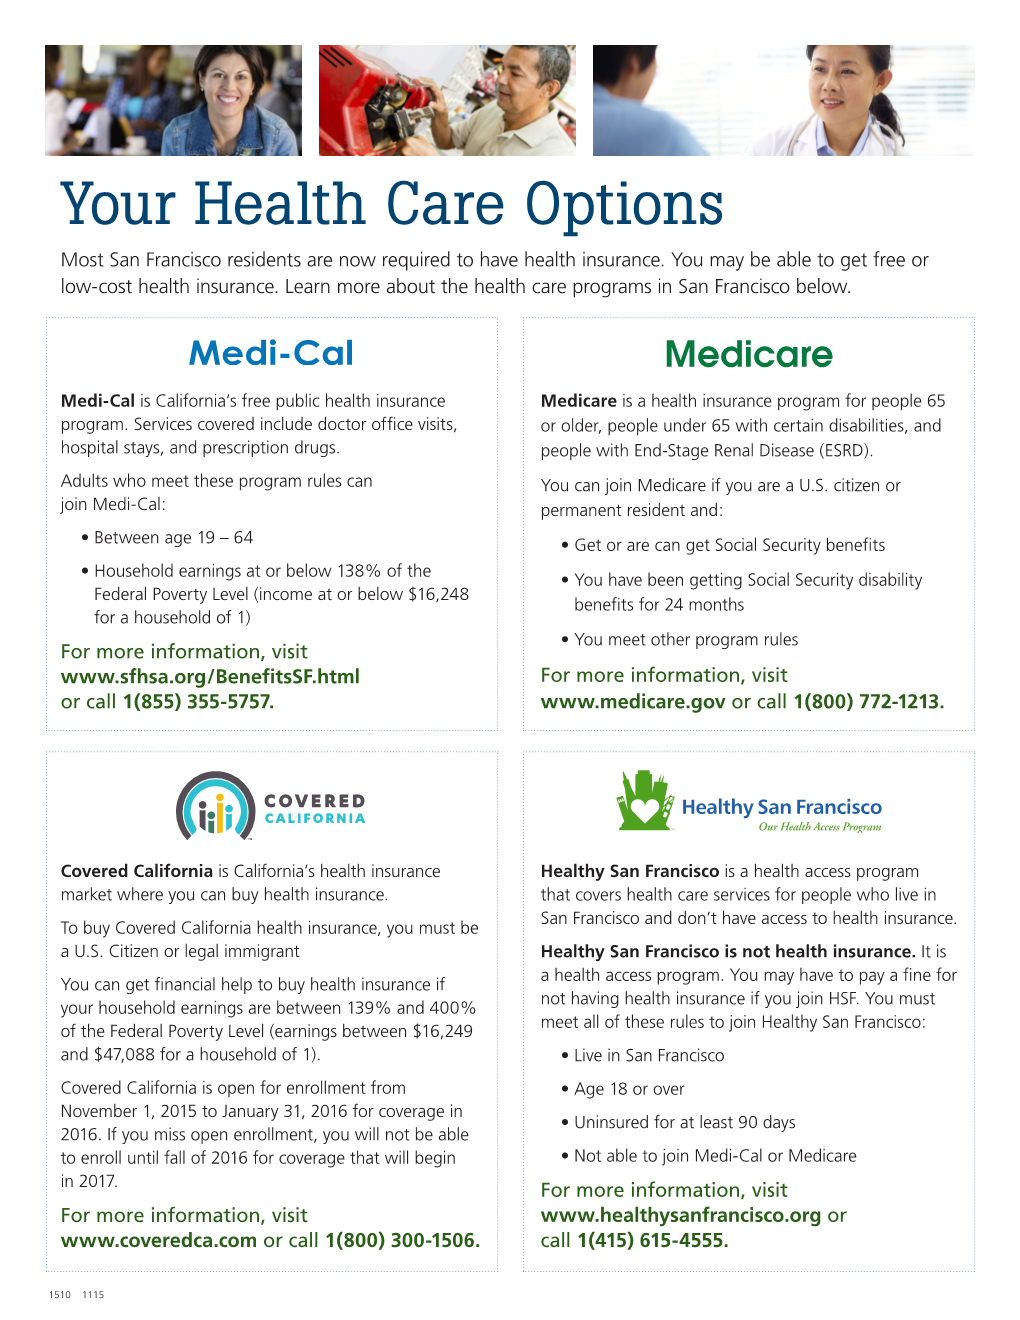 Your Health Care Options Most San Francisco Residents Are Now Required to Have Health Insurance